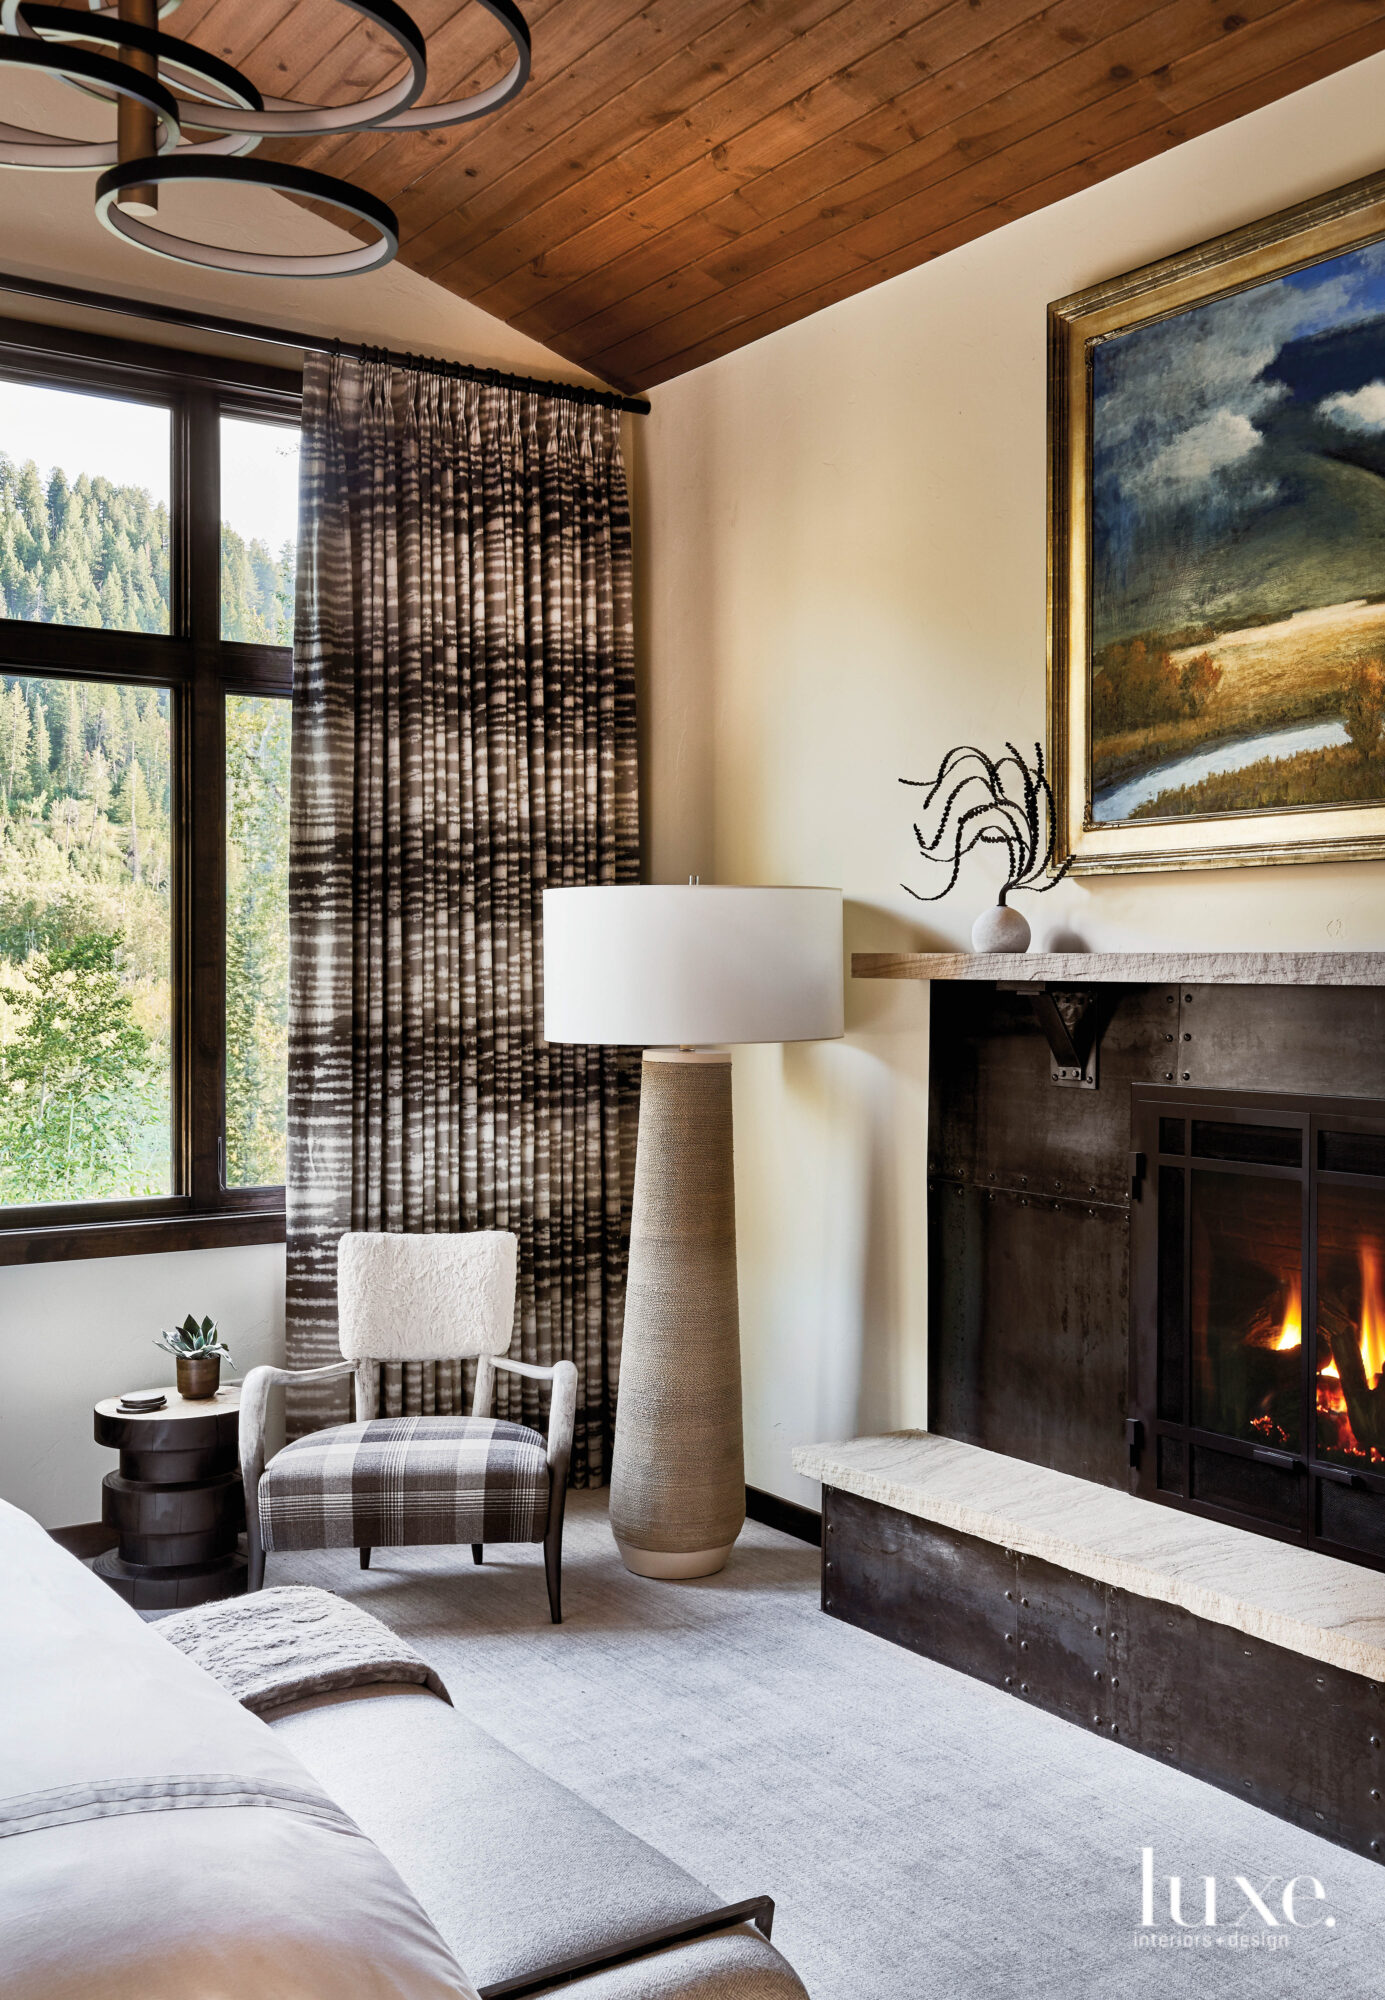 The master suite has a large fireplace and a cozy armchair.